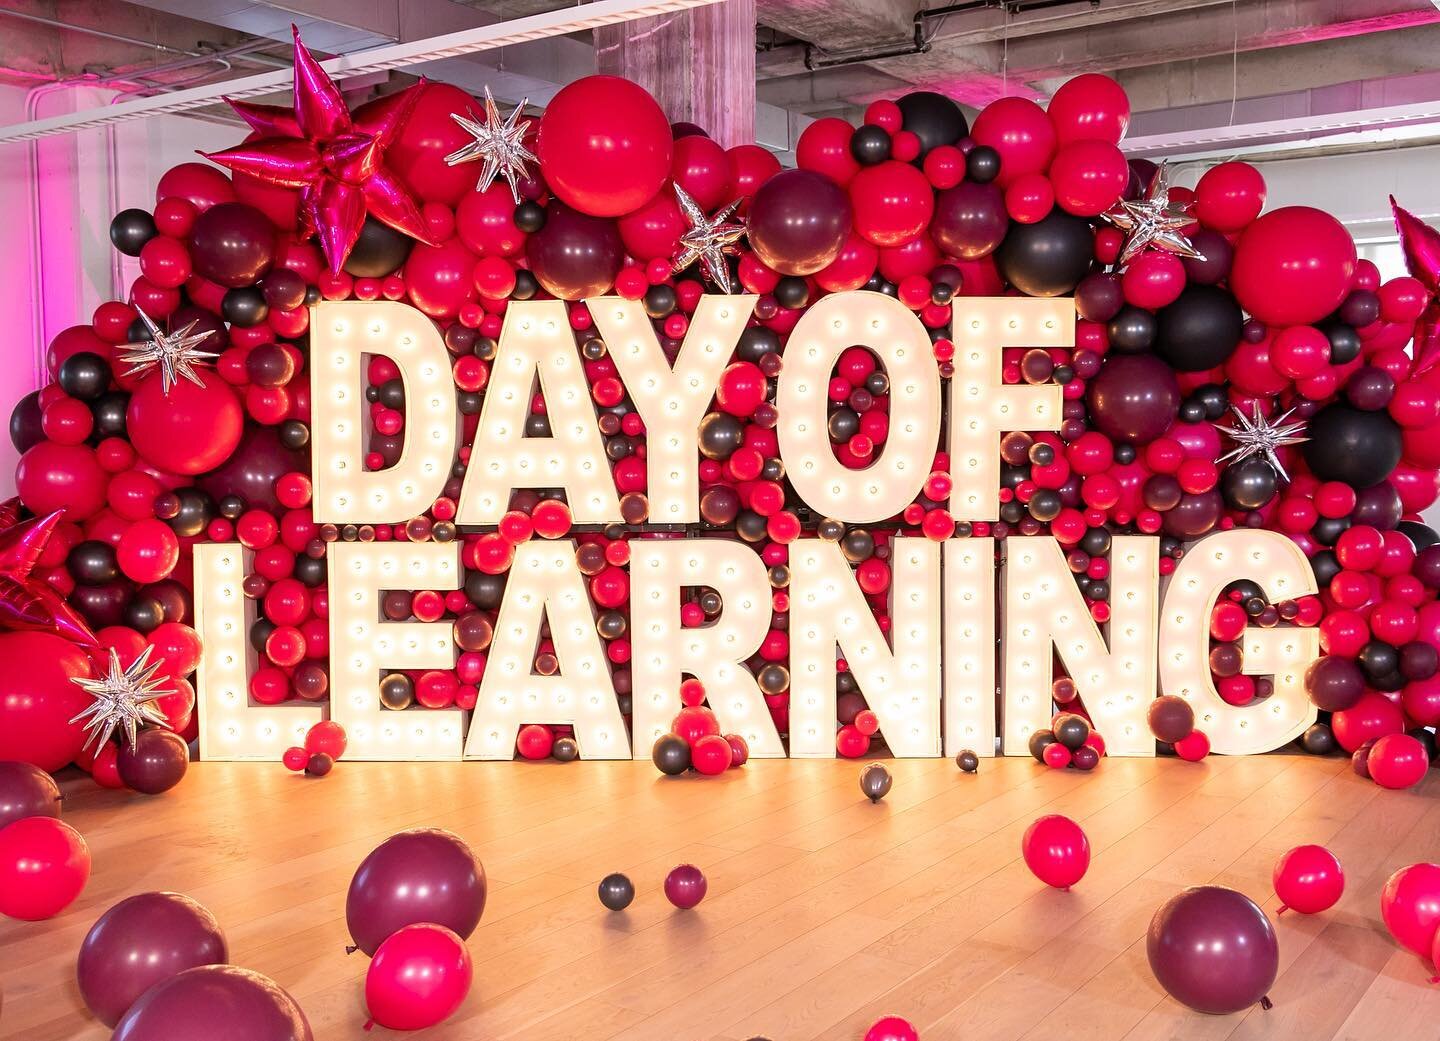 When @tmobile comes to you with a vision for their #DayOfLearning event and it turns out even more incredible than you could&rsquo;ve imagined. 😍💕💜
.
@heatherlisbell and the T-Mobile team...we look forward to making magic with you and @popcultures